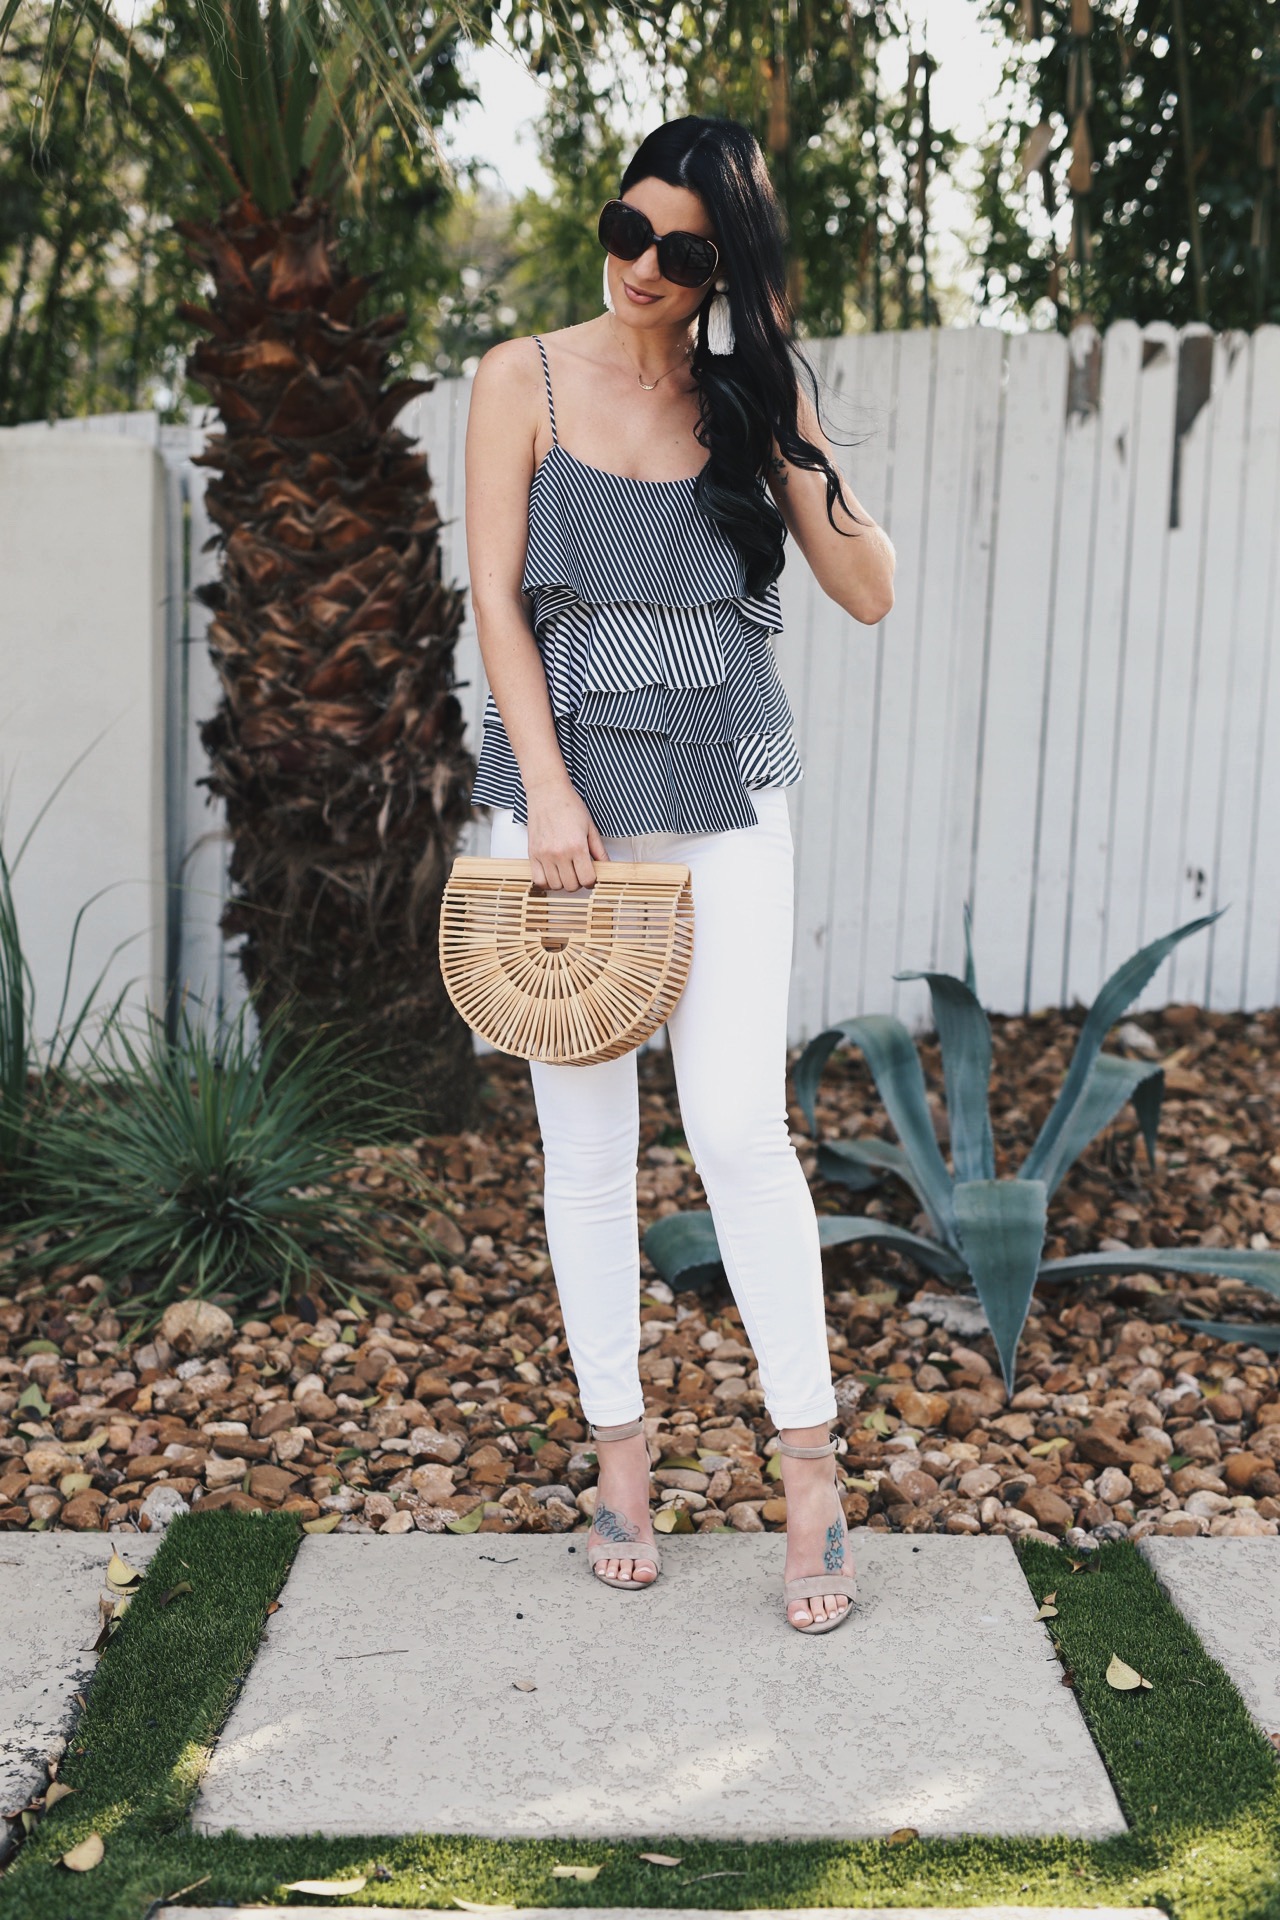 how to find the best pair of white denim | summer outfit ideas | white denim | what to pack for summer vacation | summer style ideas || Dressed to Kill #whitedenim #summeroutfit #packingtips - Finding the Perfect Pair of White Denim by popular Austin fashion blogger Dressed to Kill